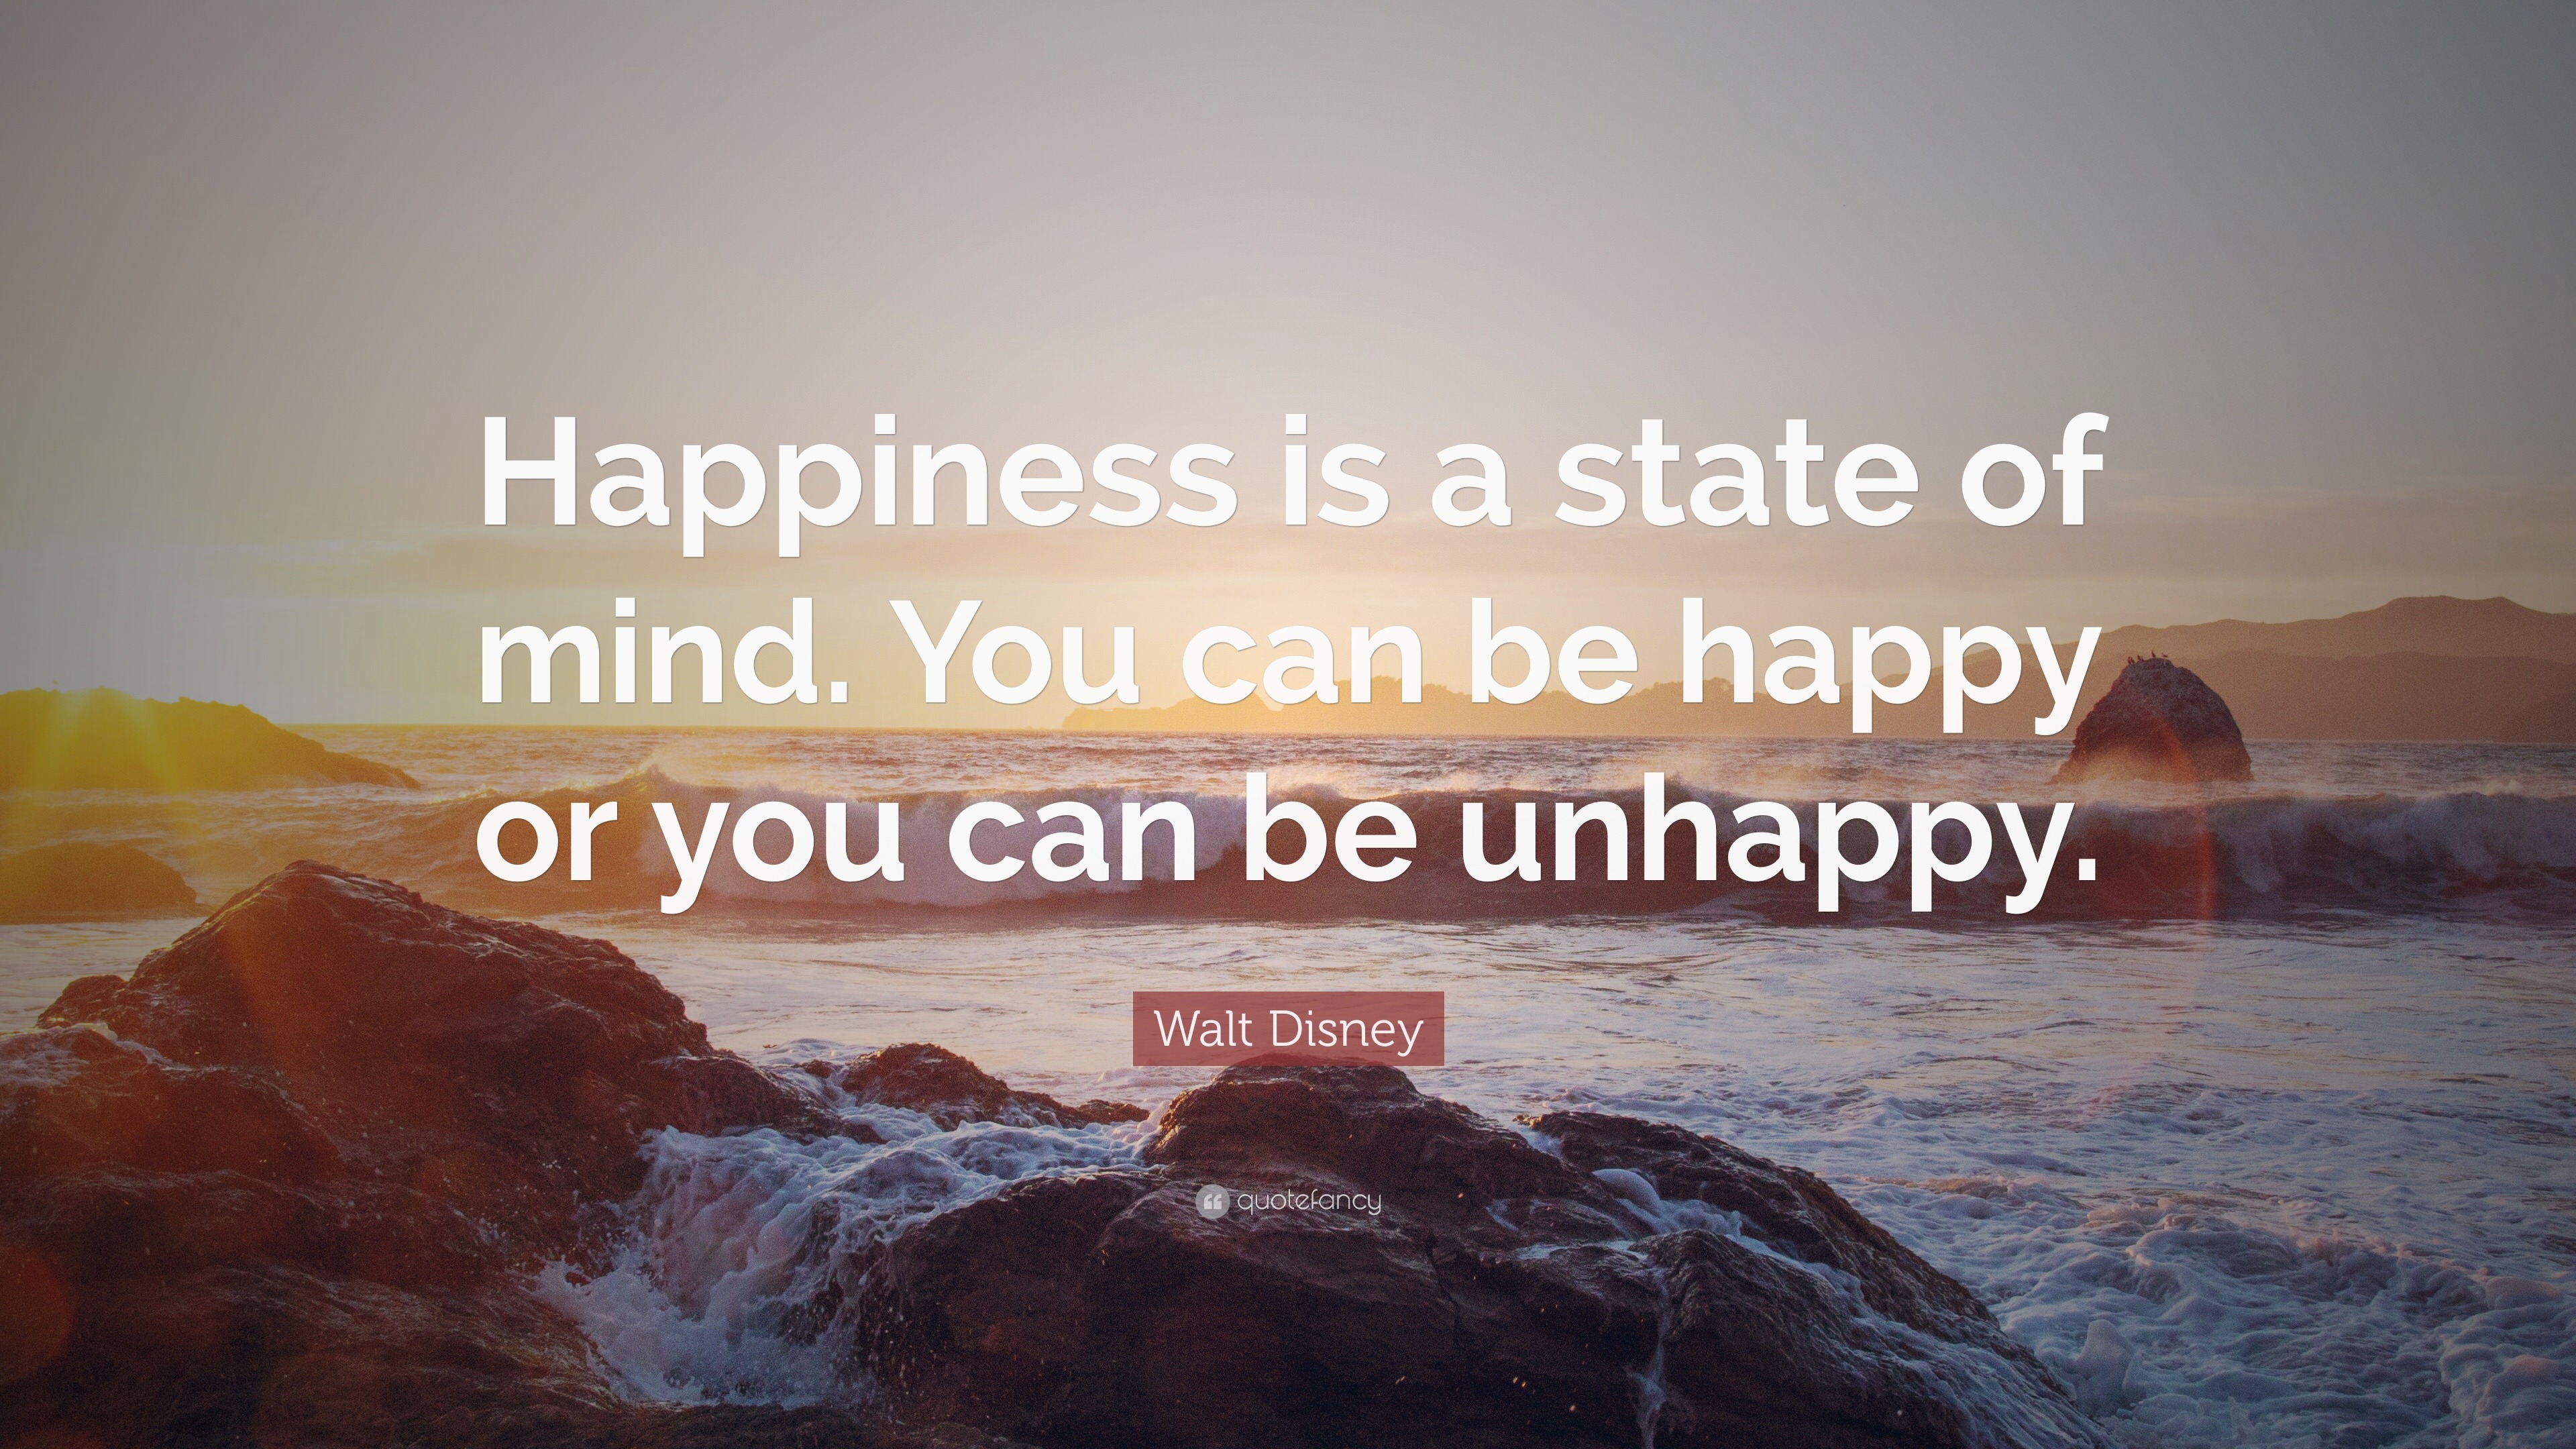  Walt  Disney  Quote  Happiness is a state of mind You can 